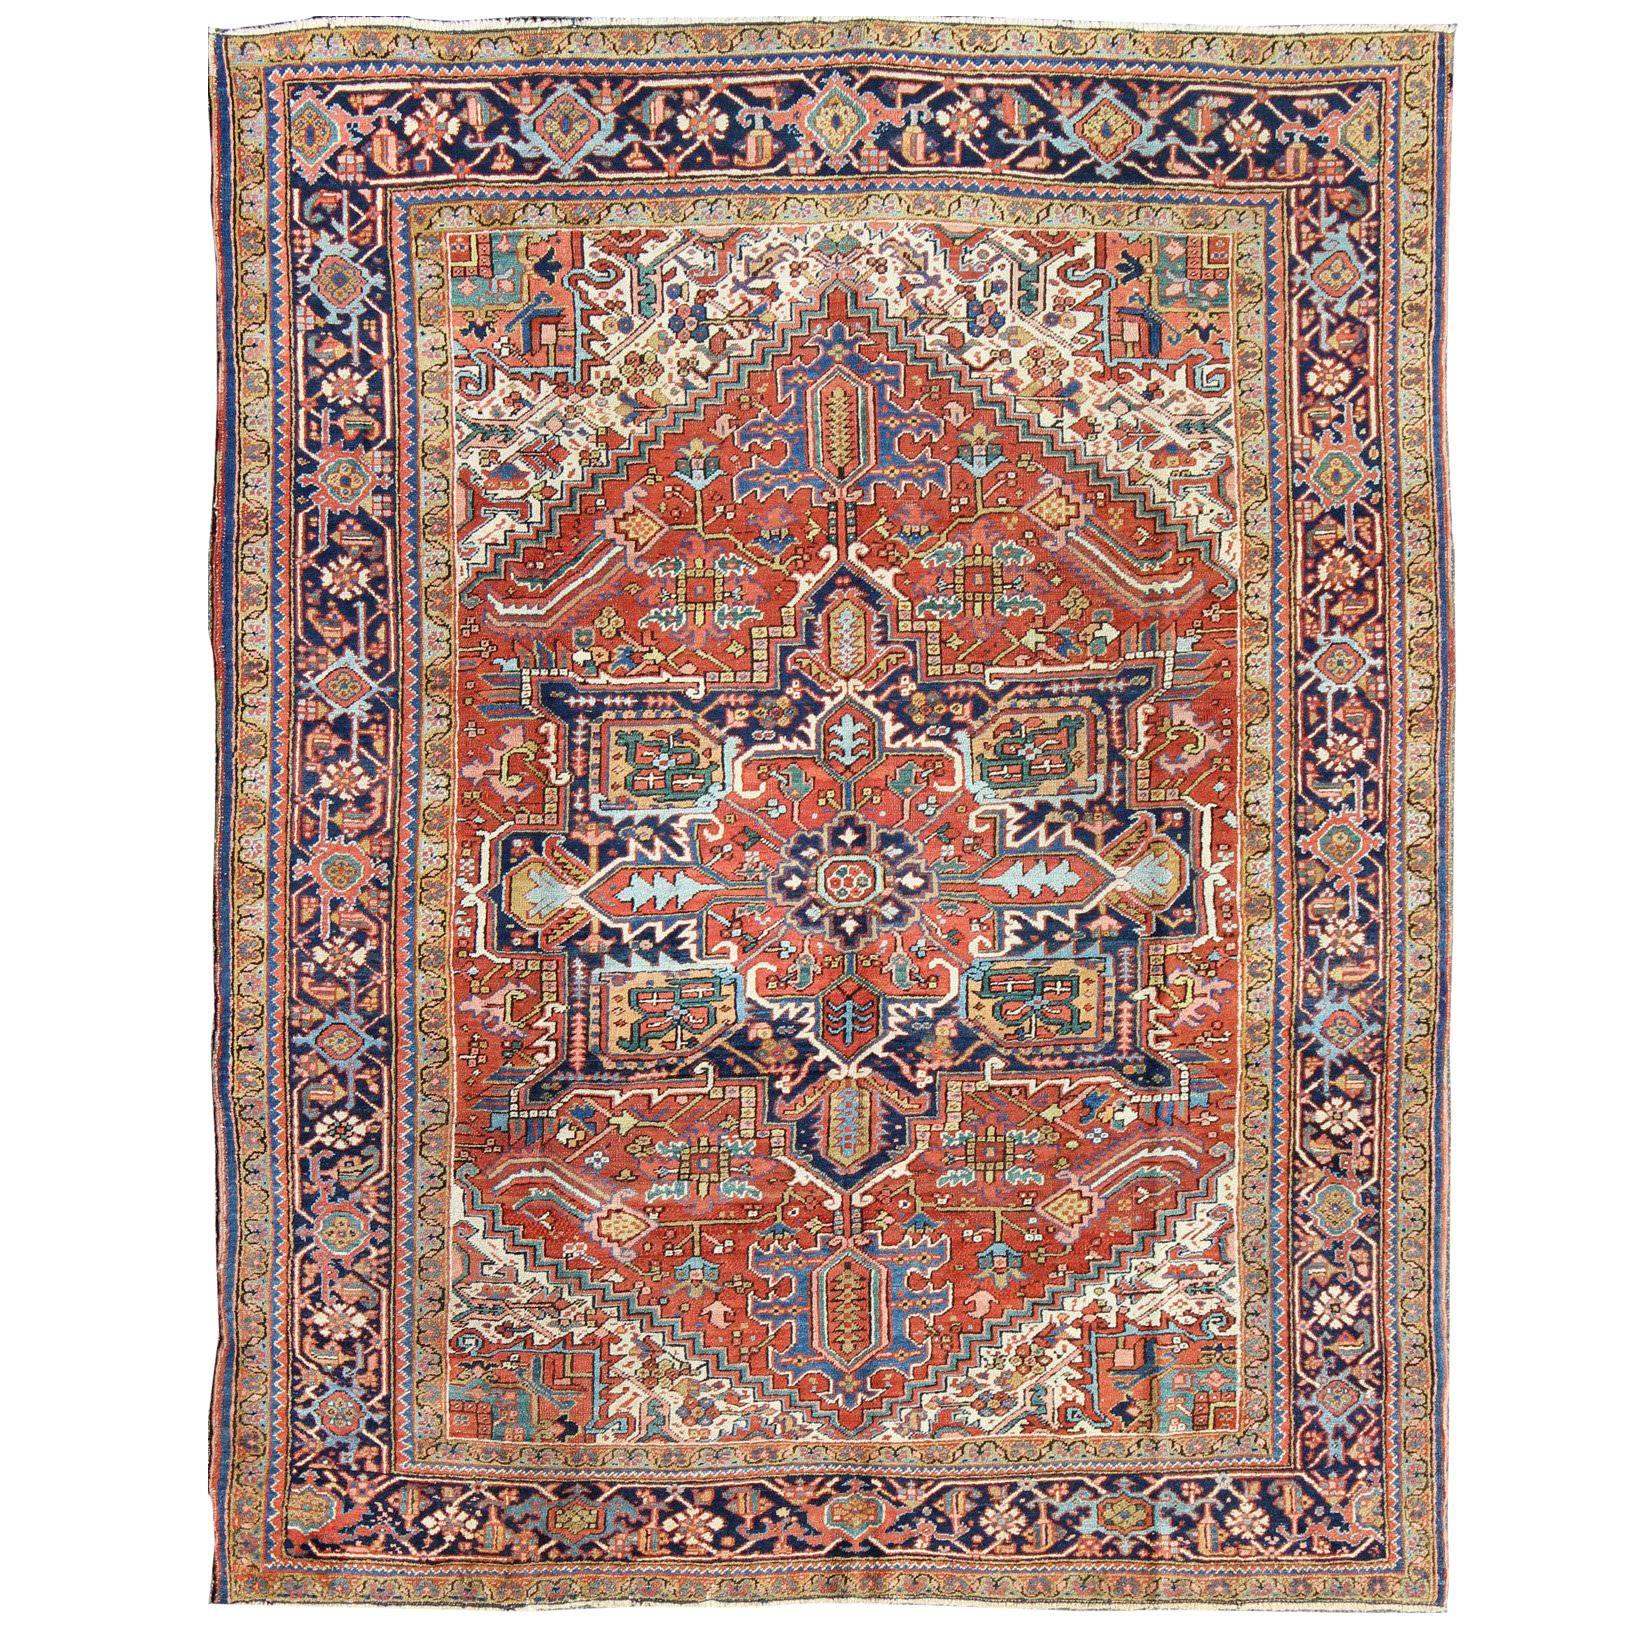 Antique Colorful Persian Heriz Rug with Geometric Patterns and Intricate Design